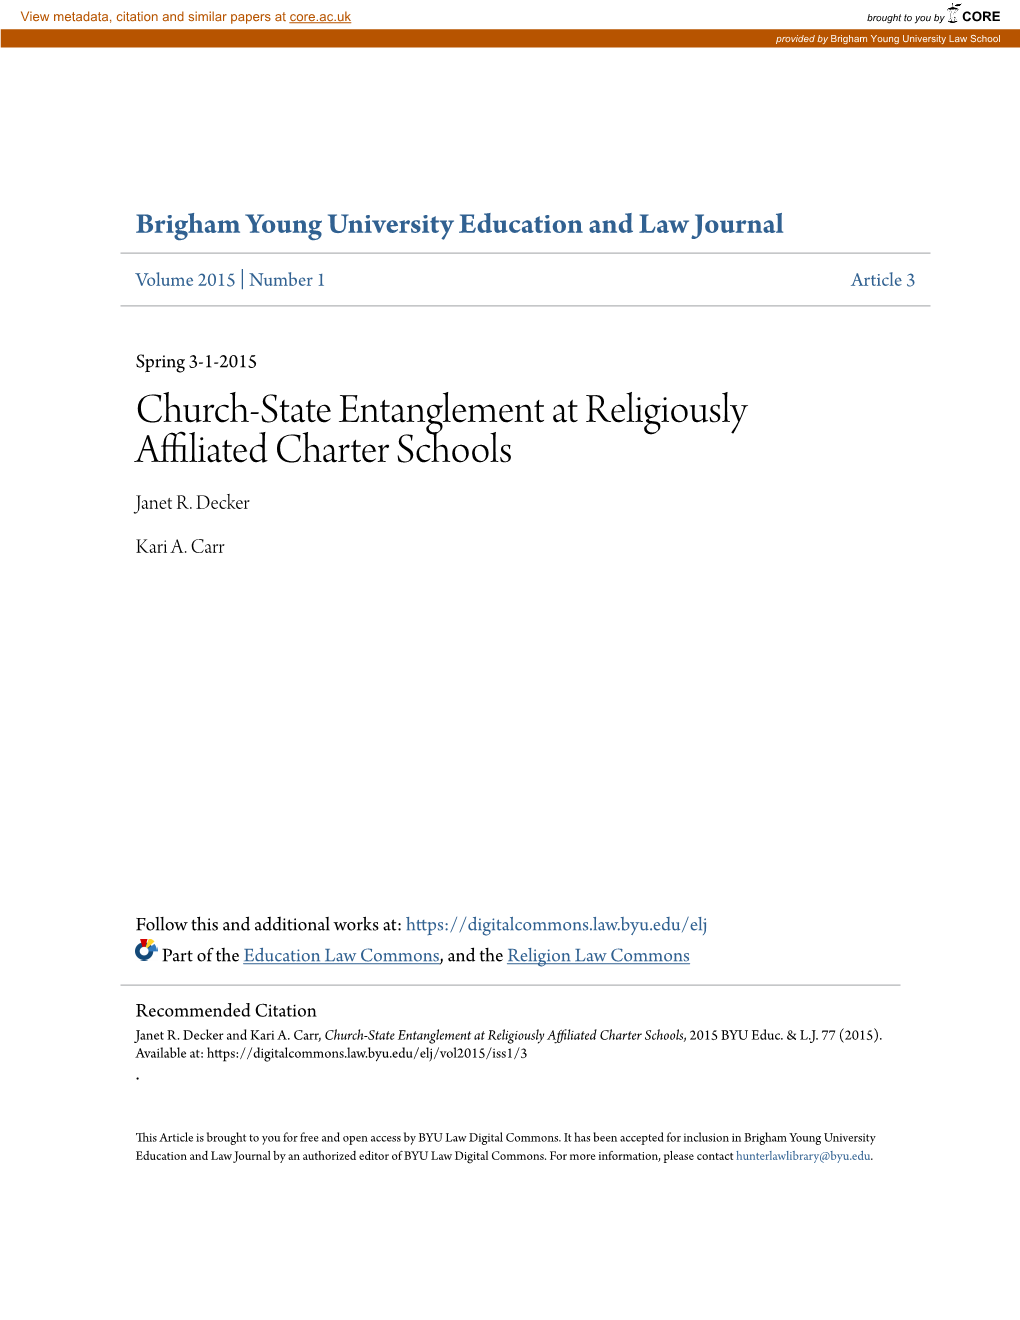 Church-State Entanglement at Religiously Affiliated Charter Schools Janet R